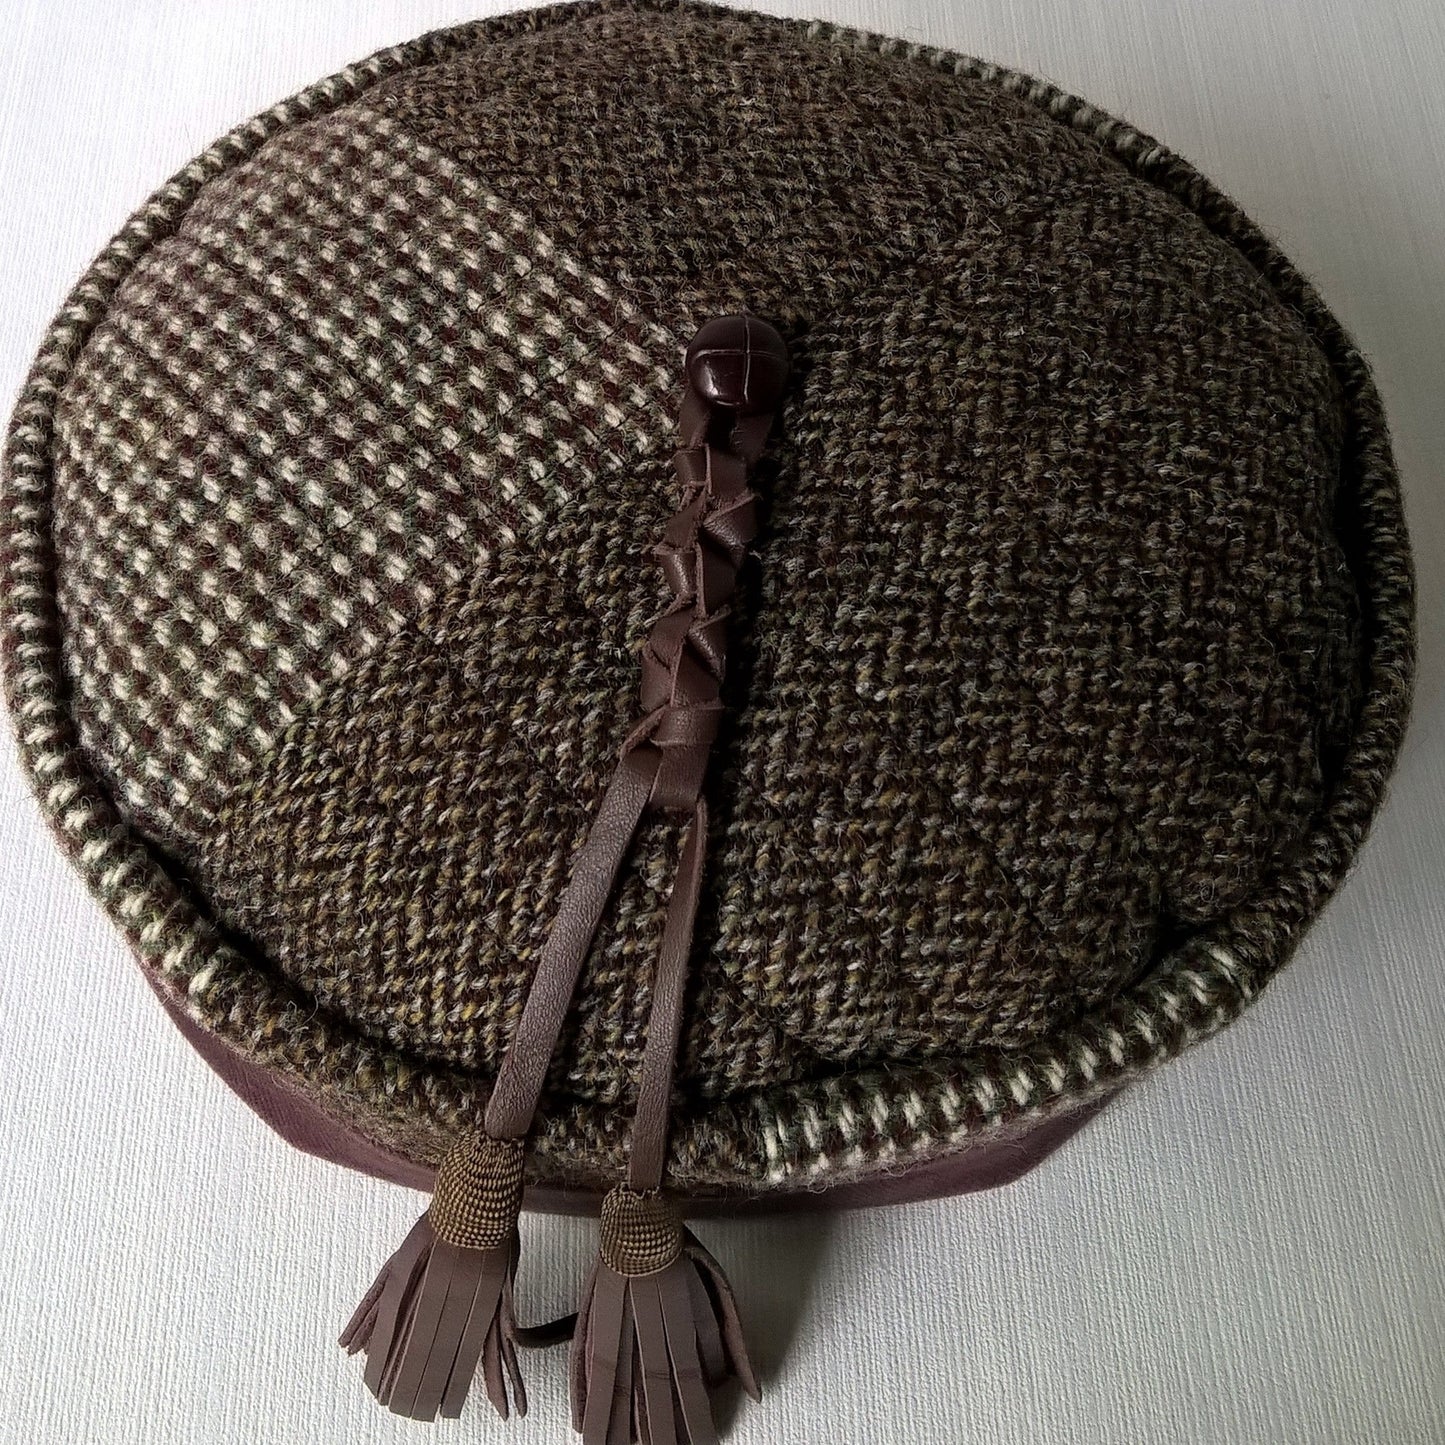 A unique smoking cap with mismatched vintage Harris Tweed wool and leather tassel in a macrame design